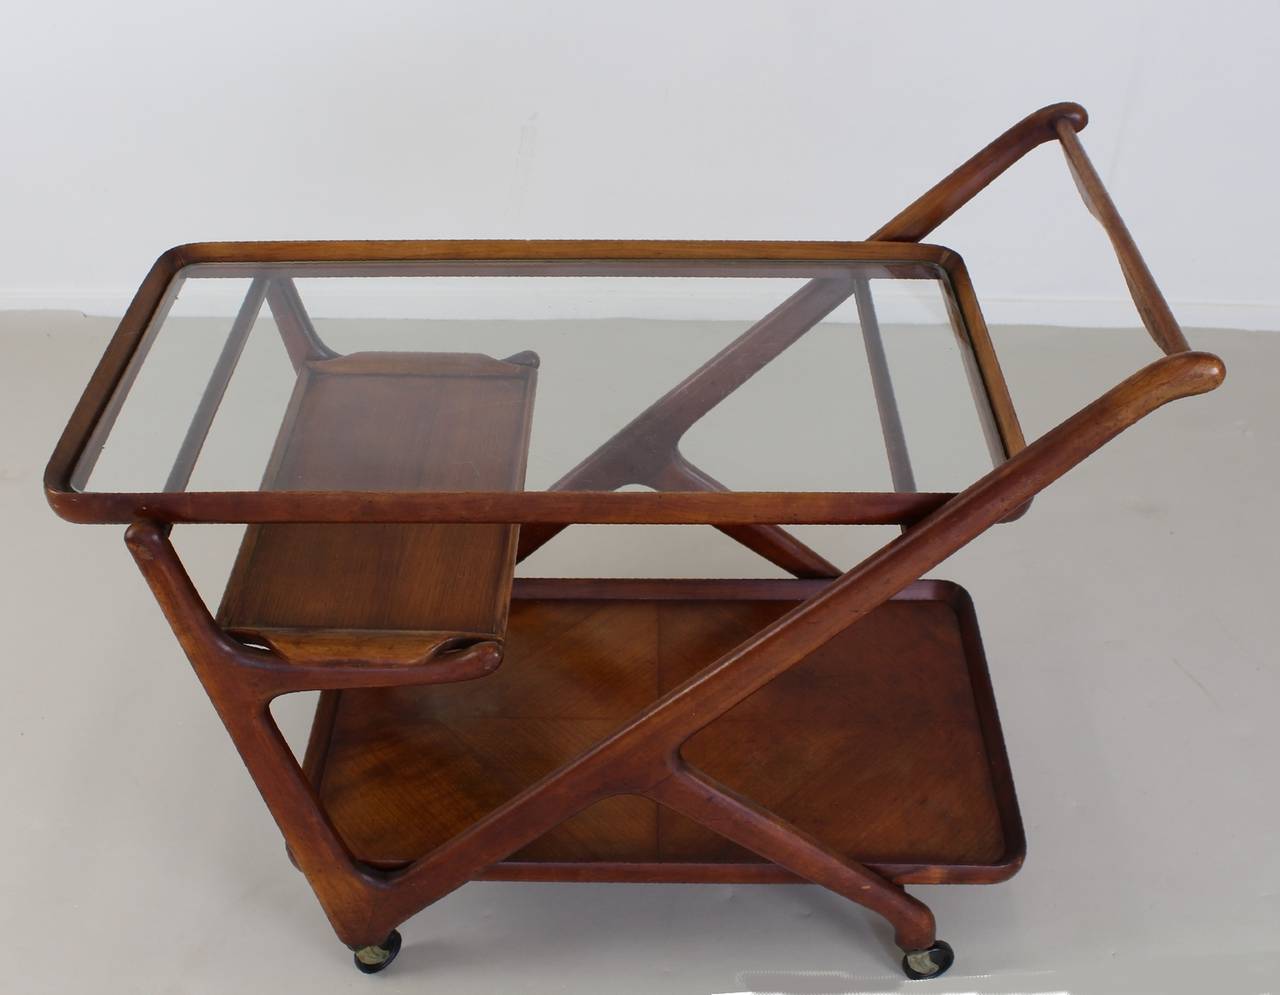 Beautiful Italian design tea trolley.
Designer; Cesare Lacca.
Manufacturer: Cassina, Italy.
Walnut wood with original glass and small tray.

Standard parcel shipment advised.